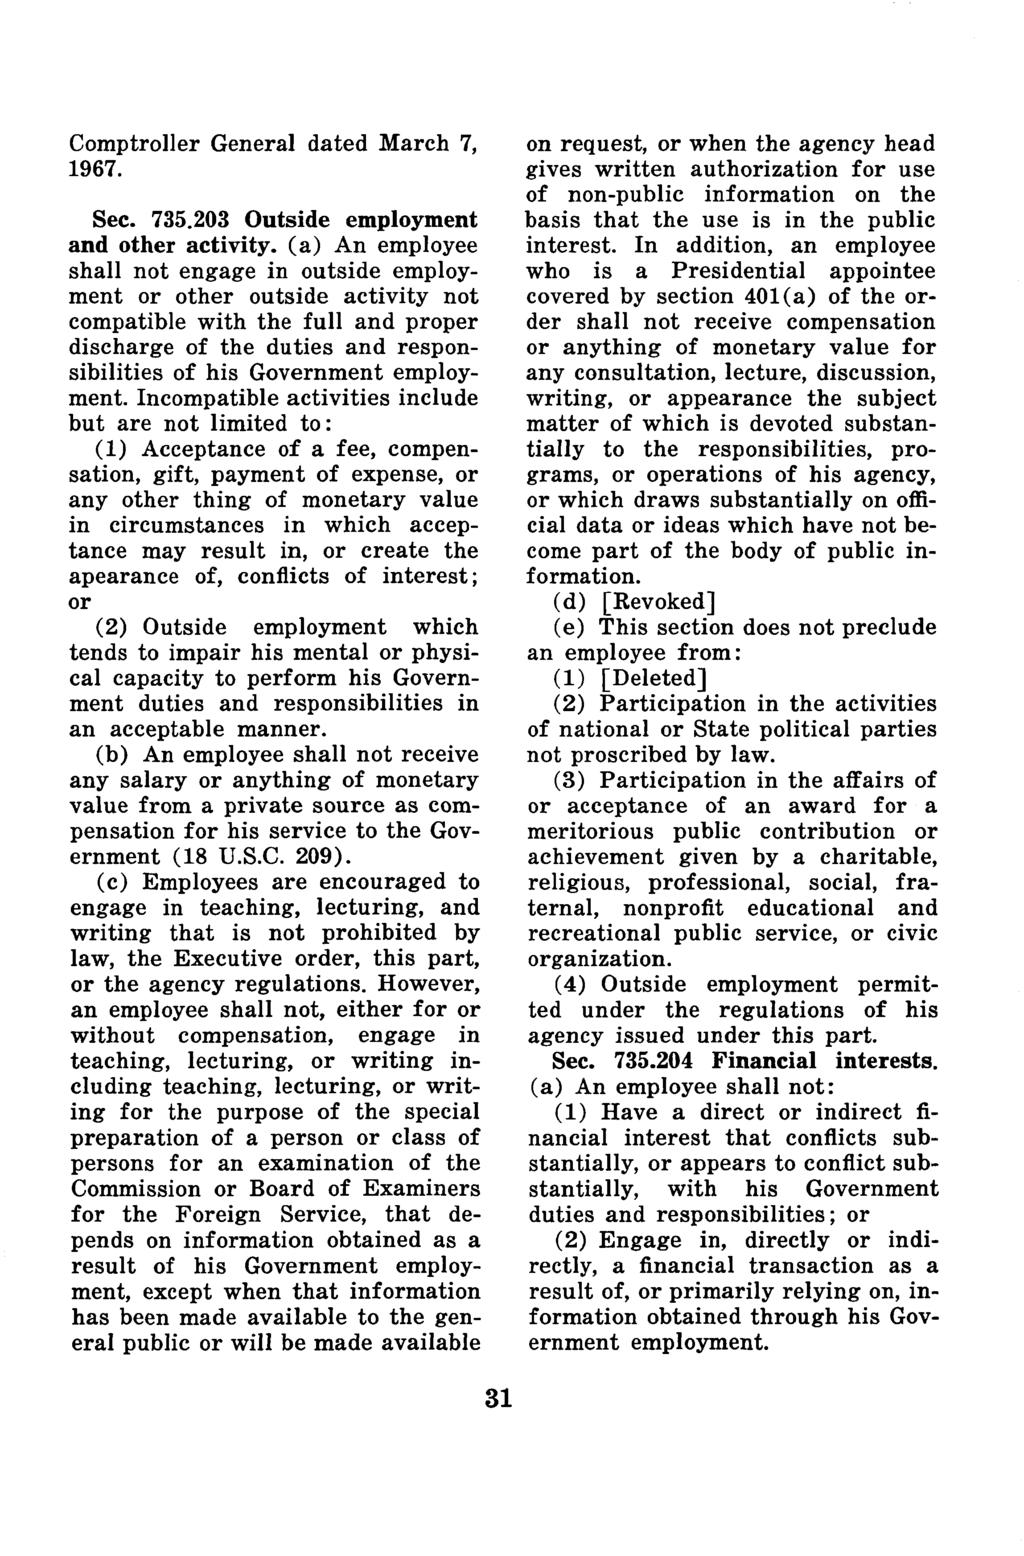 Comptroller General dated March 7, 1967. Sec. 735.